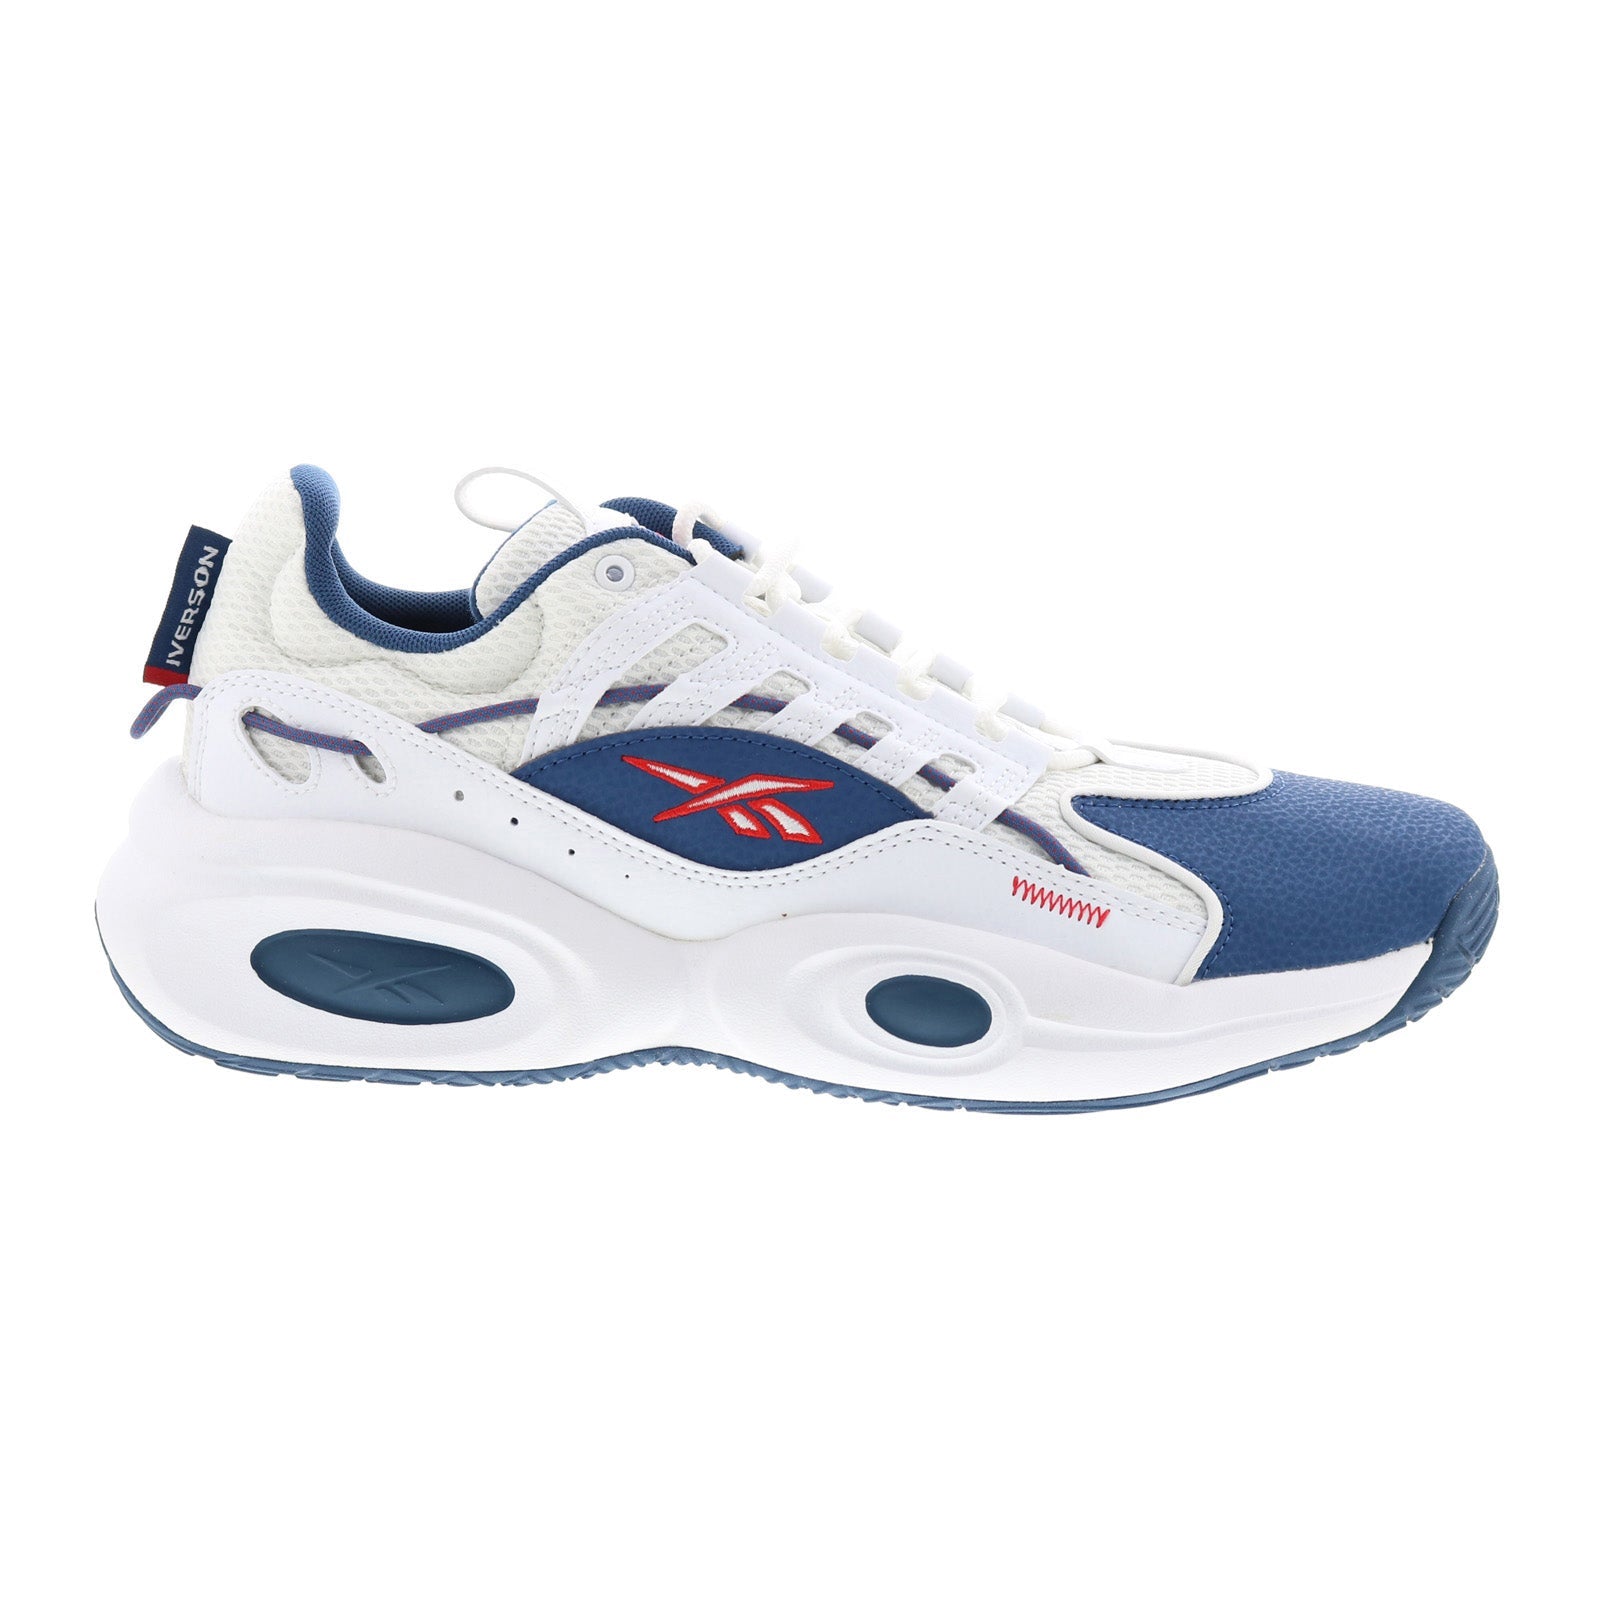 Reebok Solution Mid GY0935 Ruze Blue Basketball Sho Mens - Synthetic Shoes Athletic